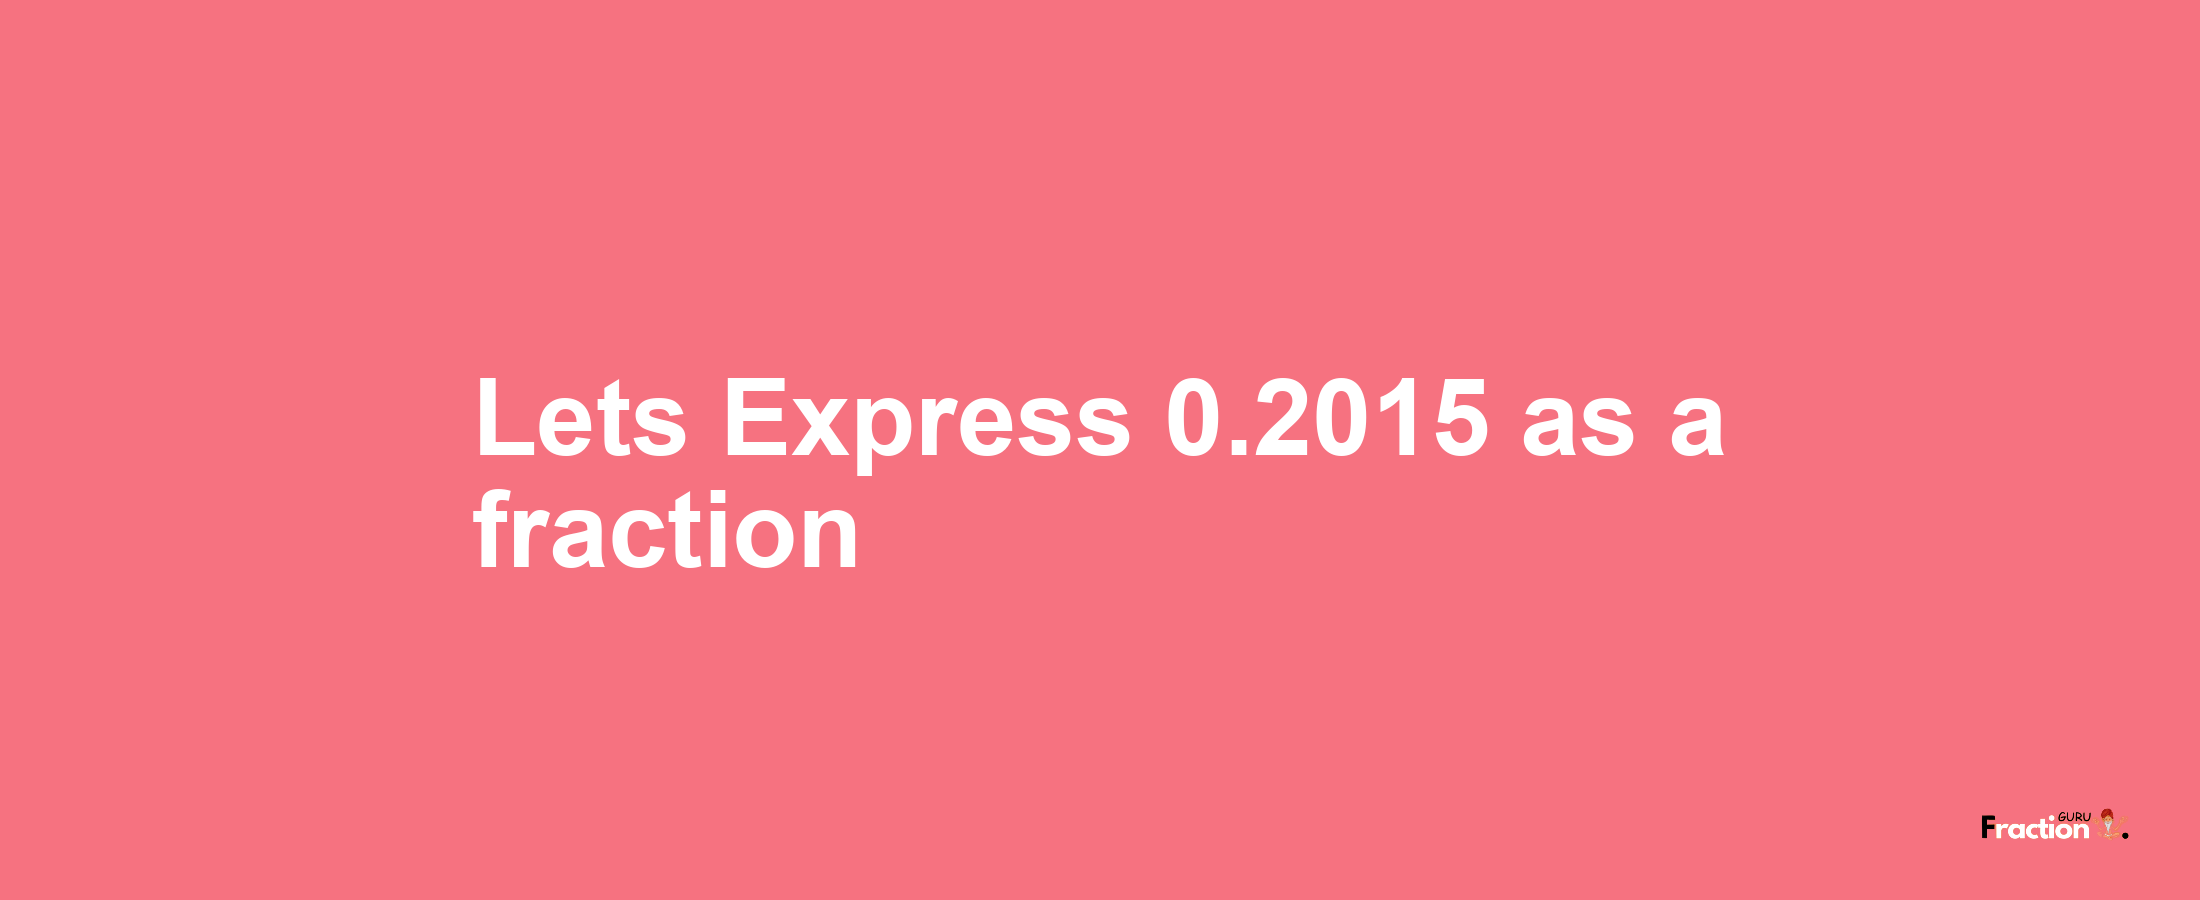 Lets Express 0.2015 as afraction